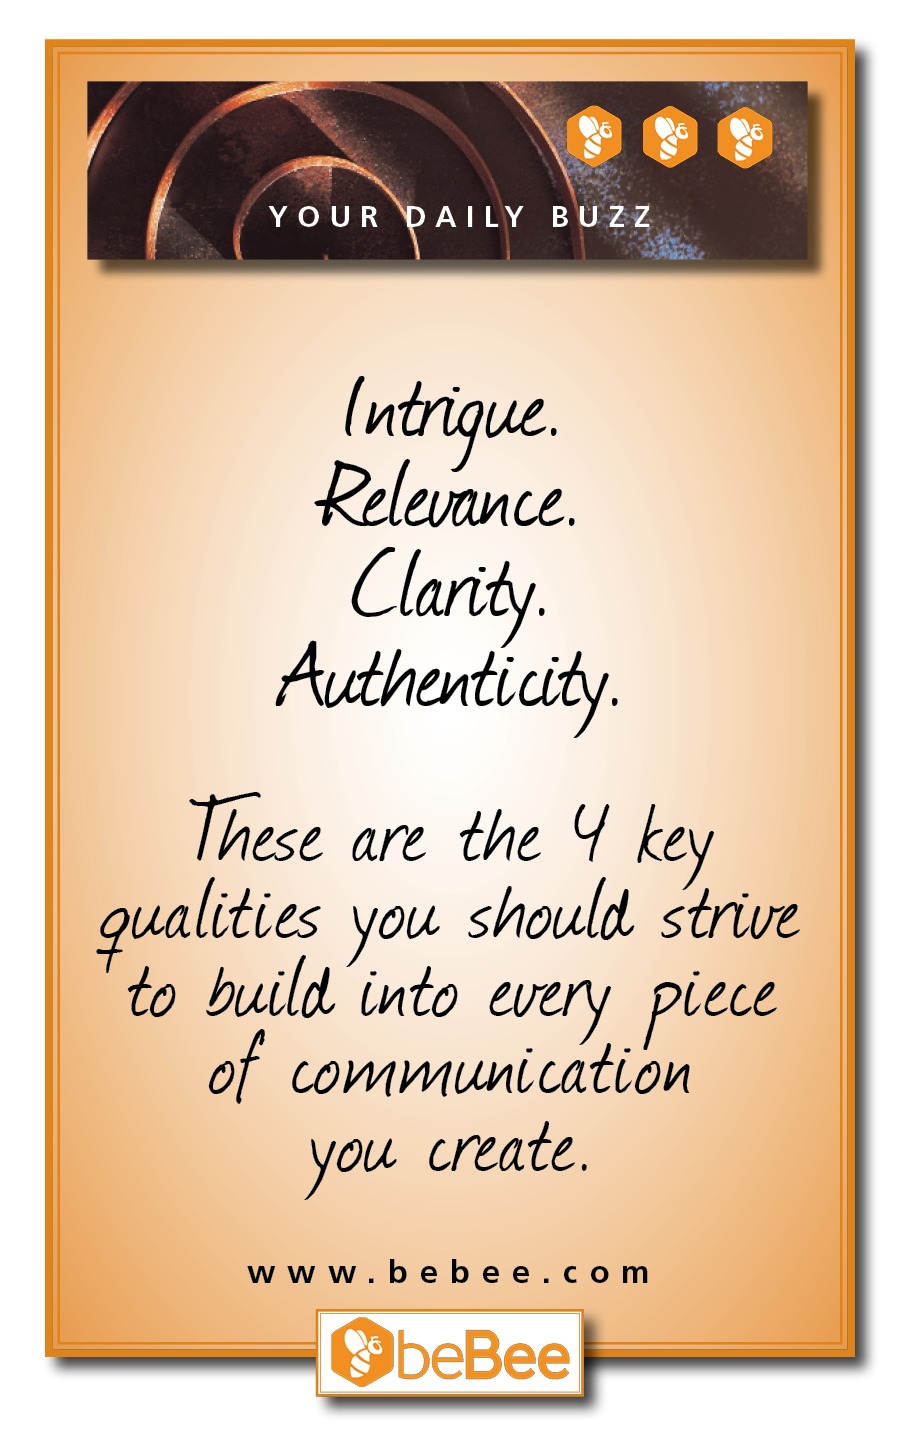 ( ER BUZZ

 

(ntrigue.
Rois
Clarity.
Authenticity.

These are the Y key
walities you should strive
to build into every piece

of communication

you create.

www.bebee.com